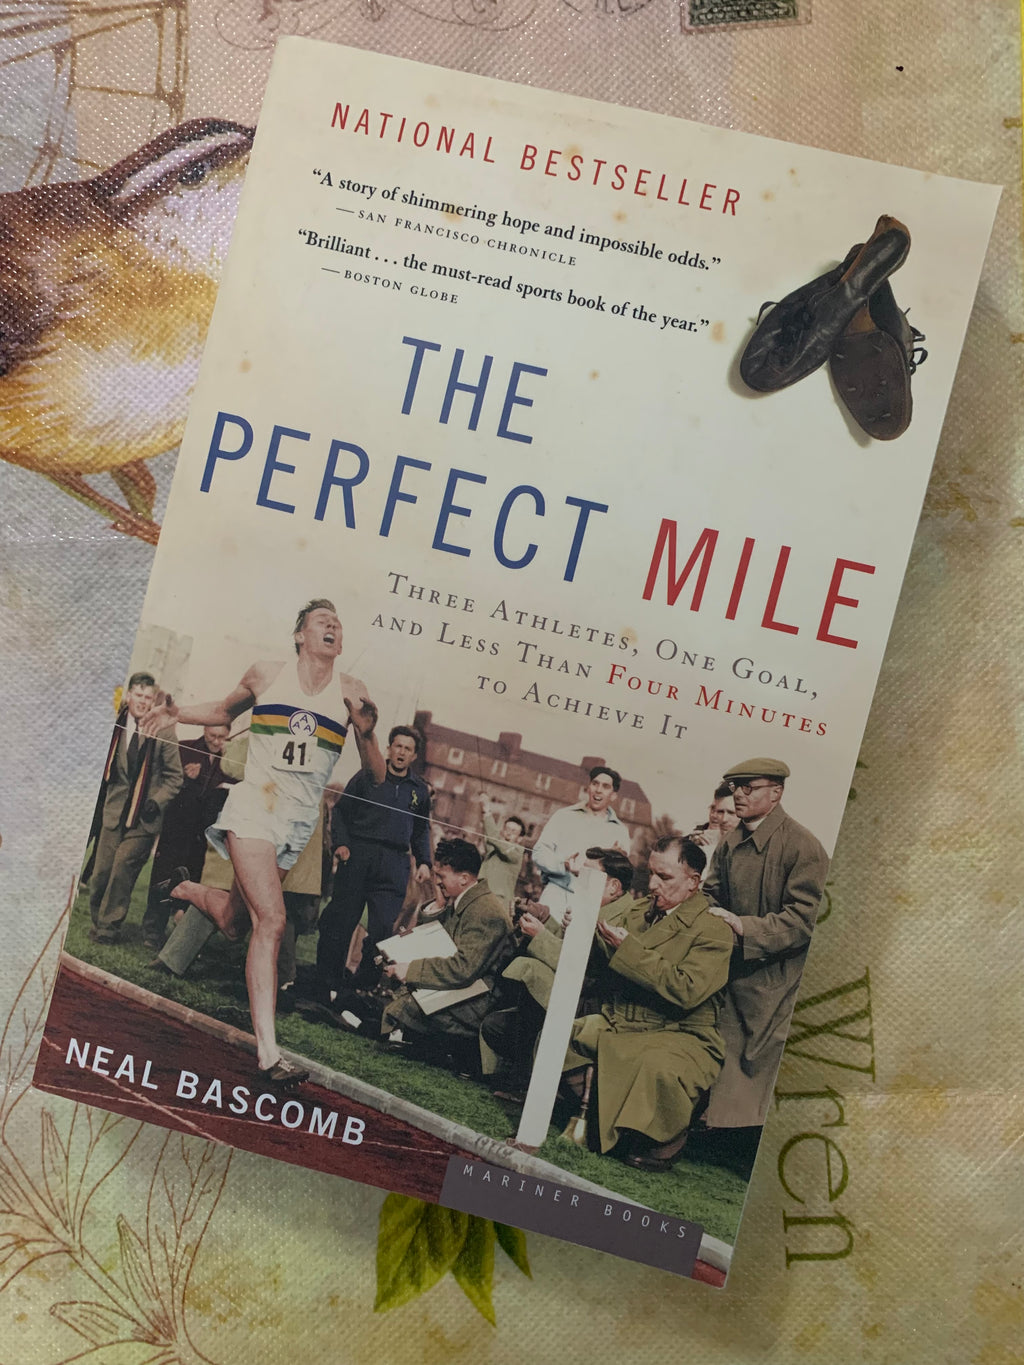 The Perfect Mile: Three Athletes, One Goal, and Less Than Four Minutes to Achieve It- By Neal Bascomb